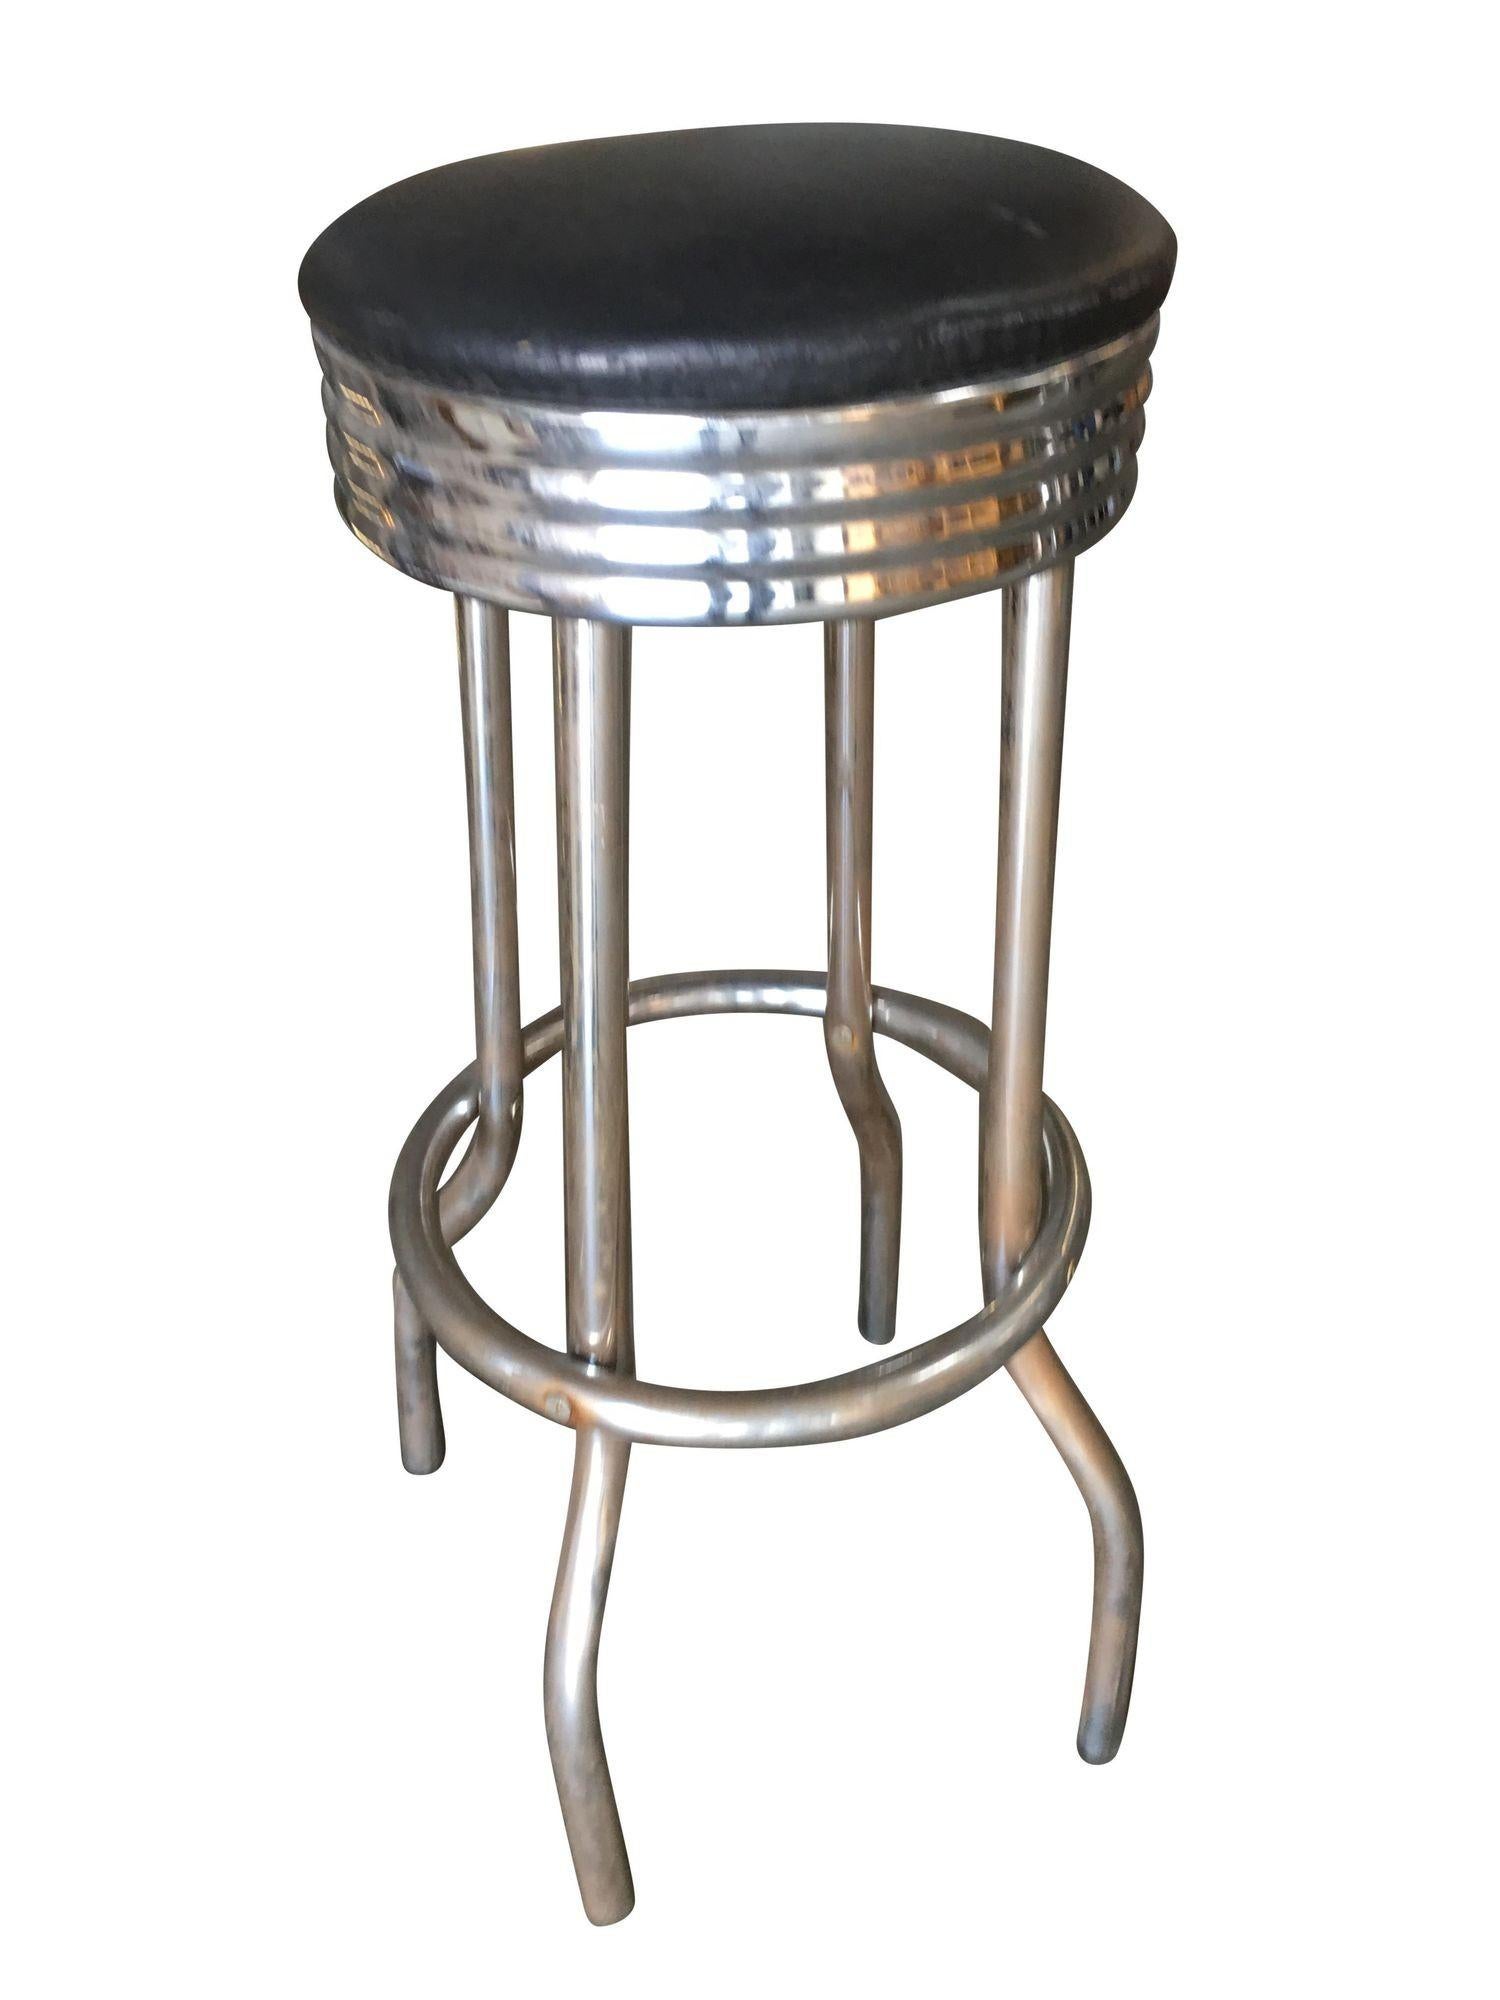 Original Mid Century 1950s Chrome Diner Bar Stool featuring an all-chromed steel design with a black vinyl seat. The stools have a nice patina to them with some signs of wear, and use, and very minor surface rust. A great look for your newly